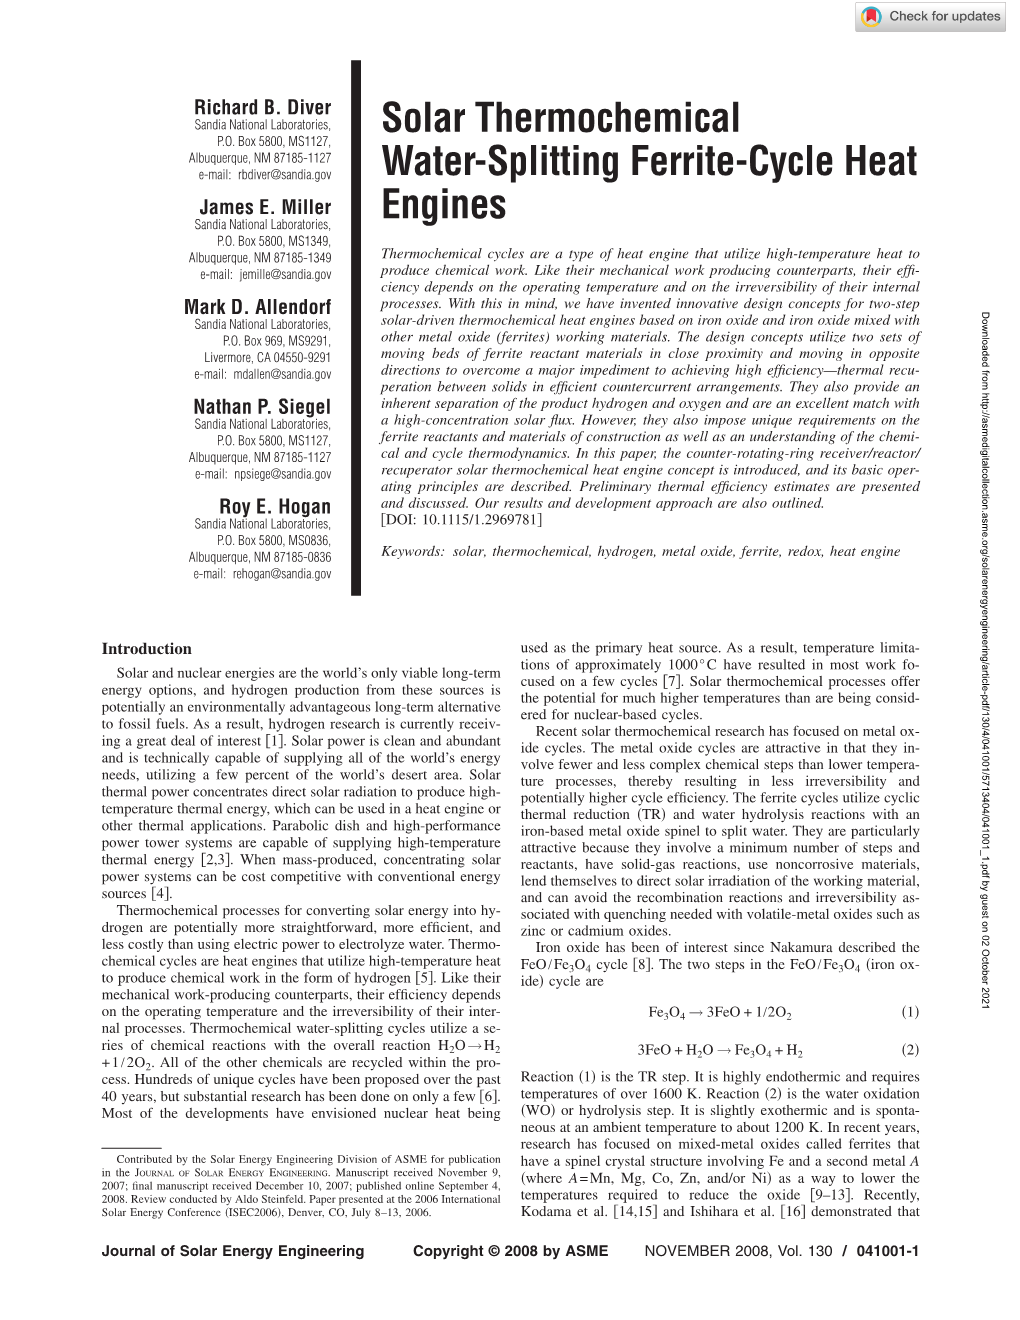 Solar Thermochemical Water-Splitting Ferrite-Cycle Heat Engines